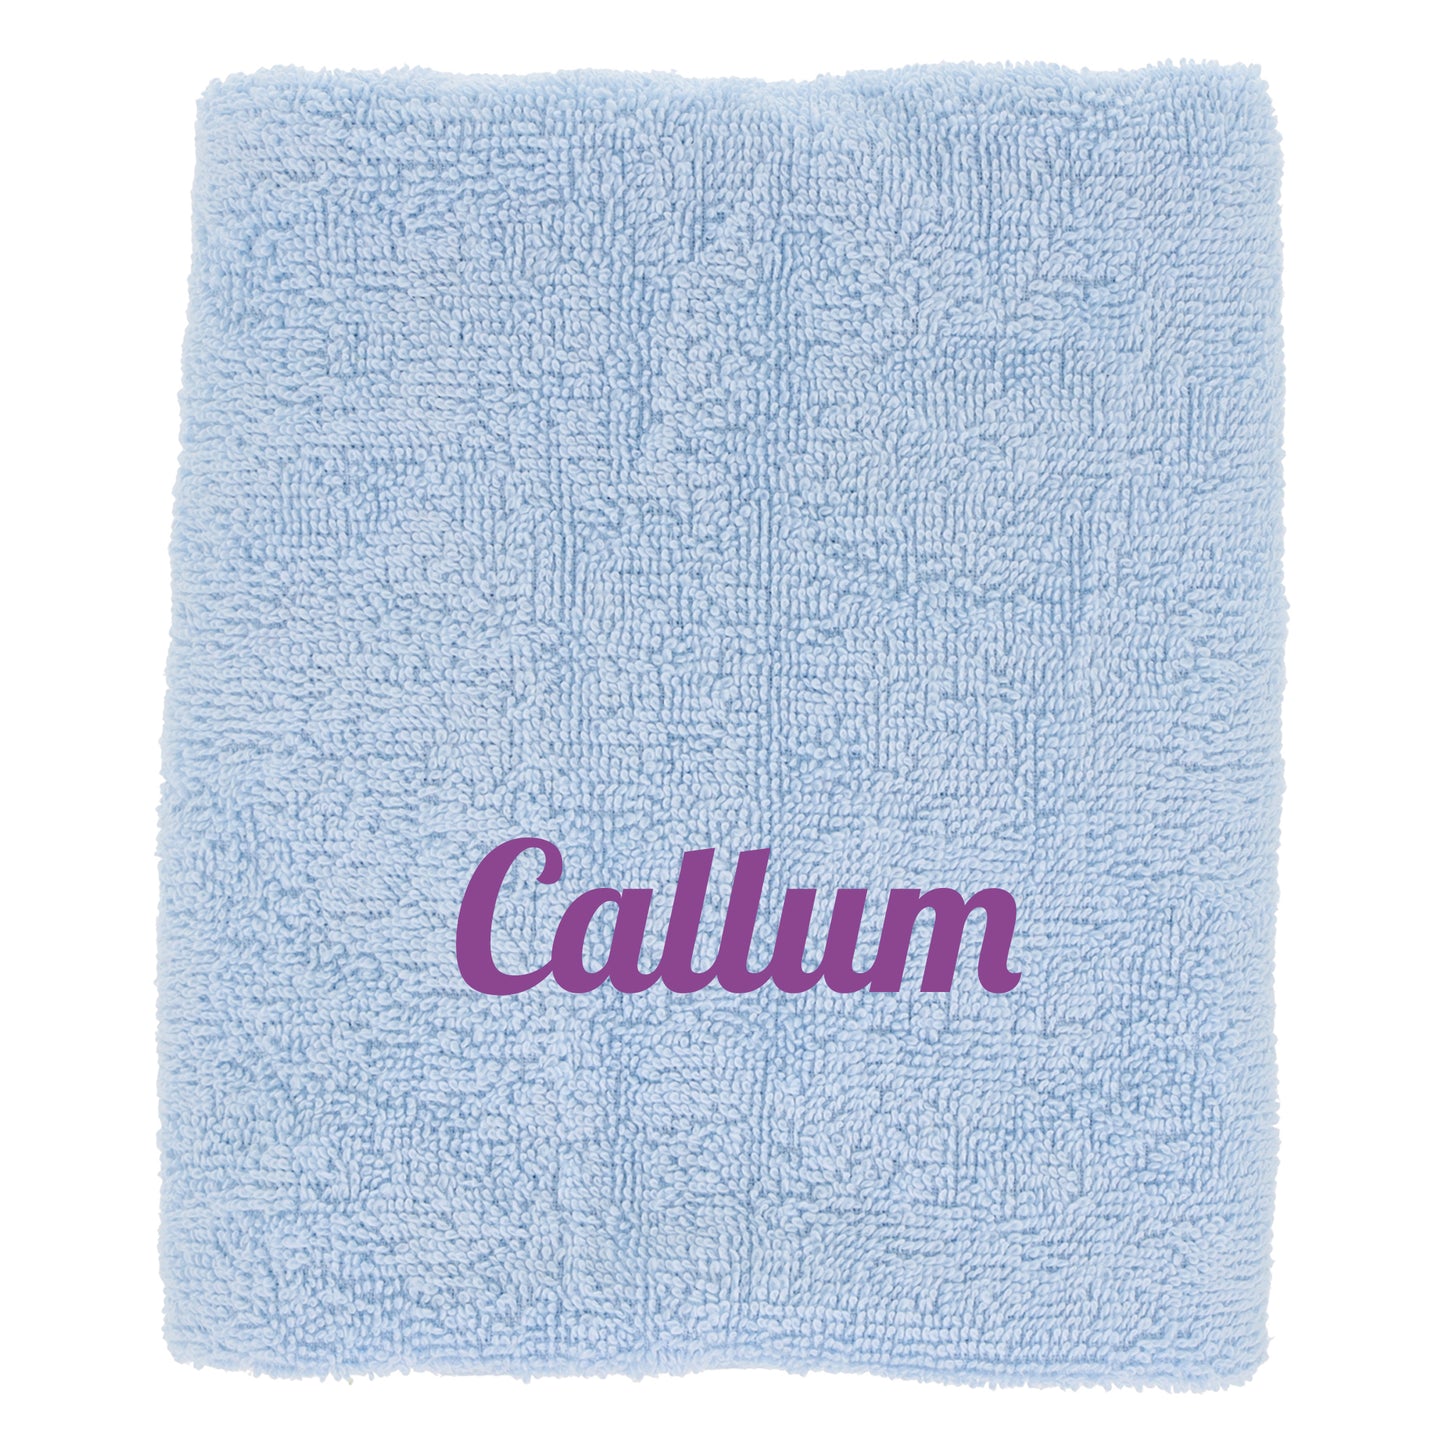 Personalised Embroidered Name Towel Bath or Hand Size  - Always Looking Good -   